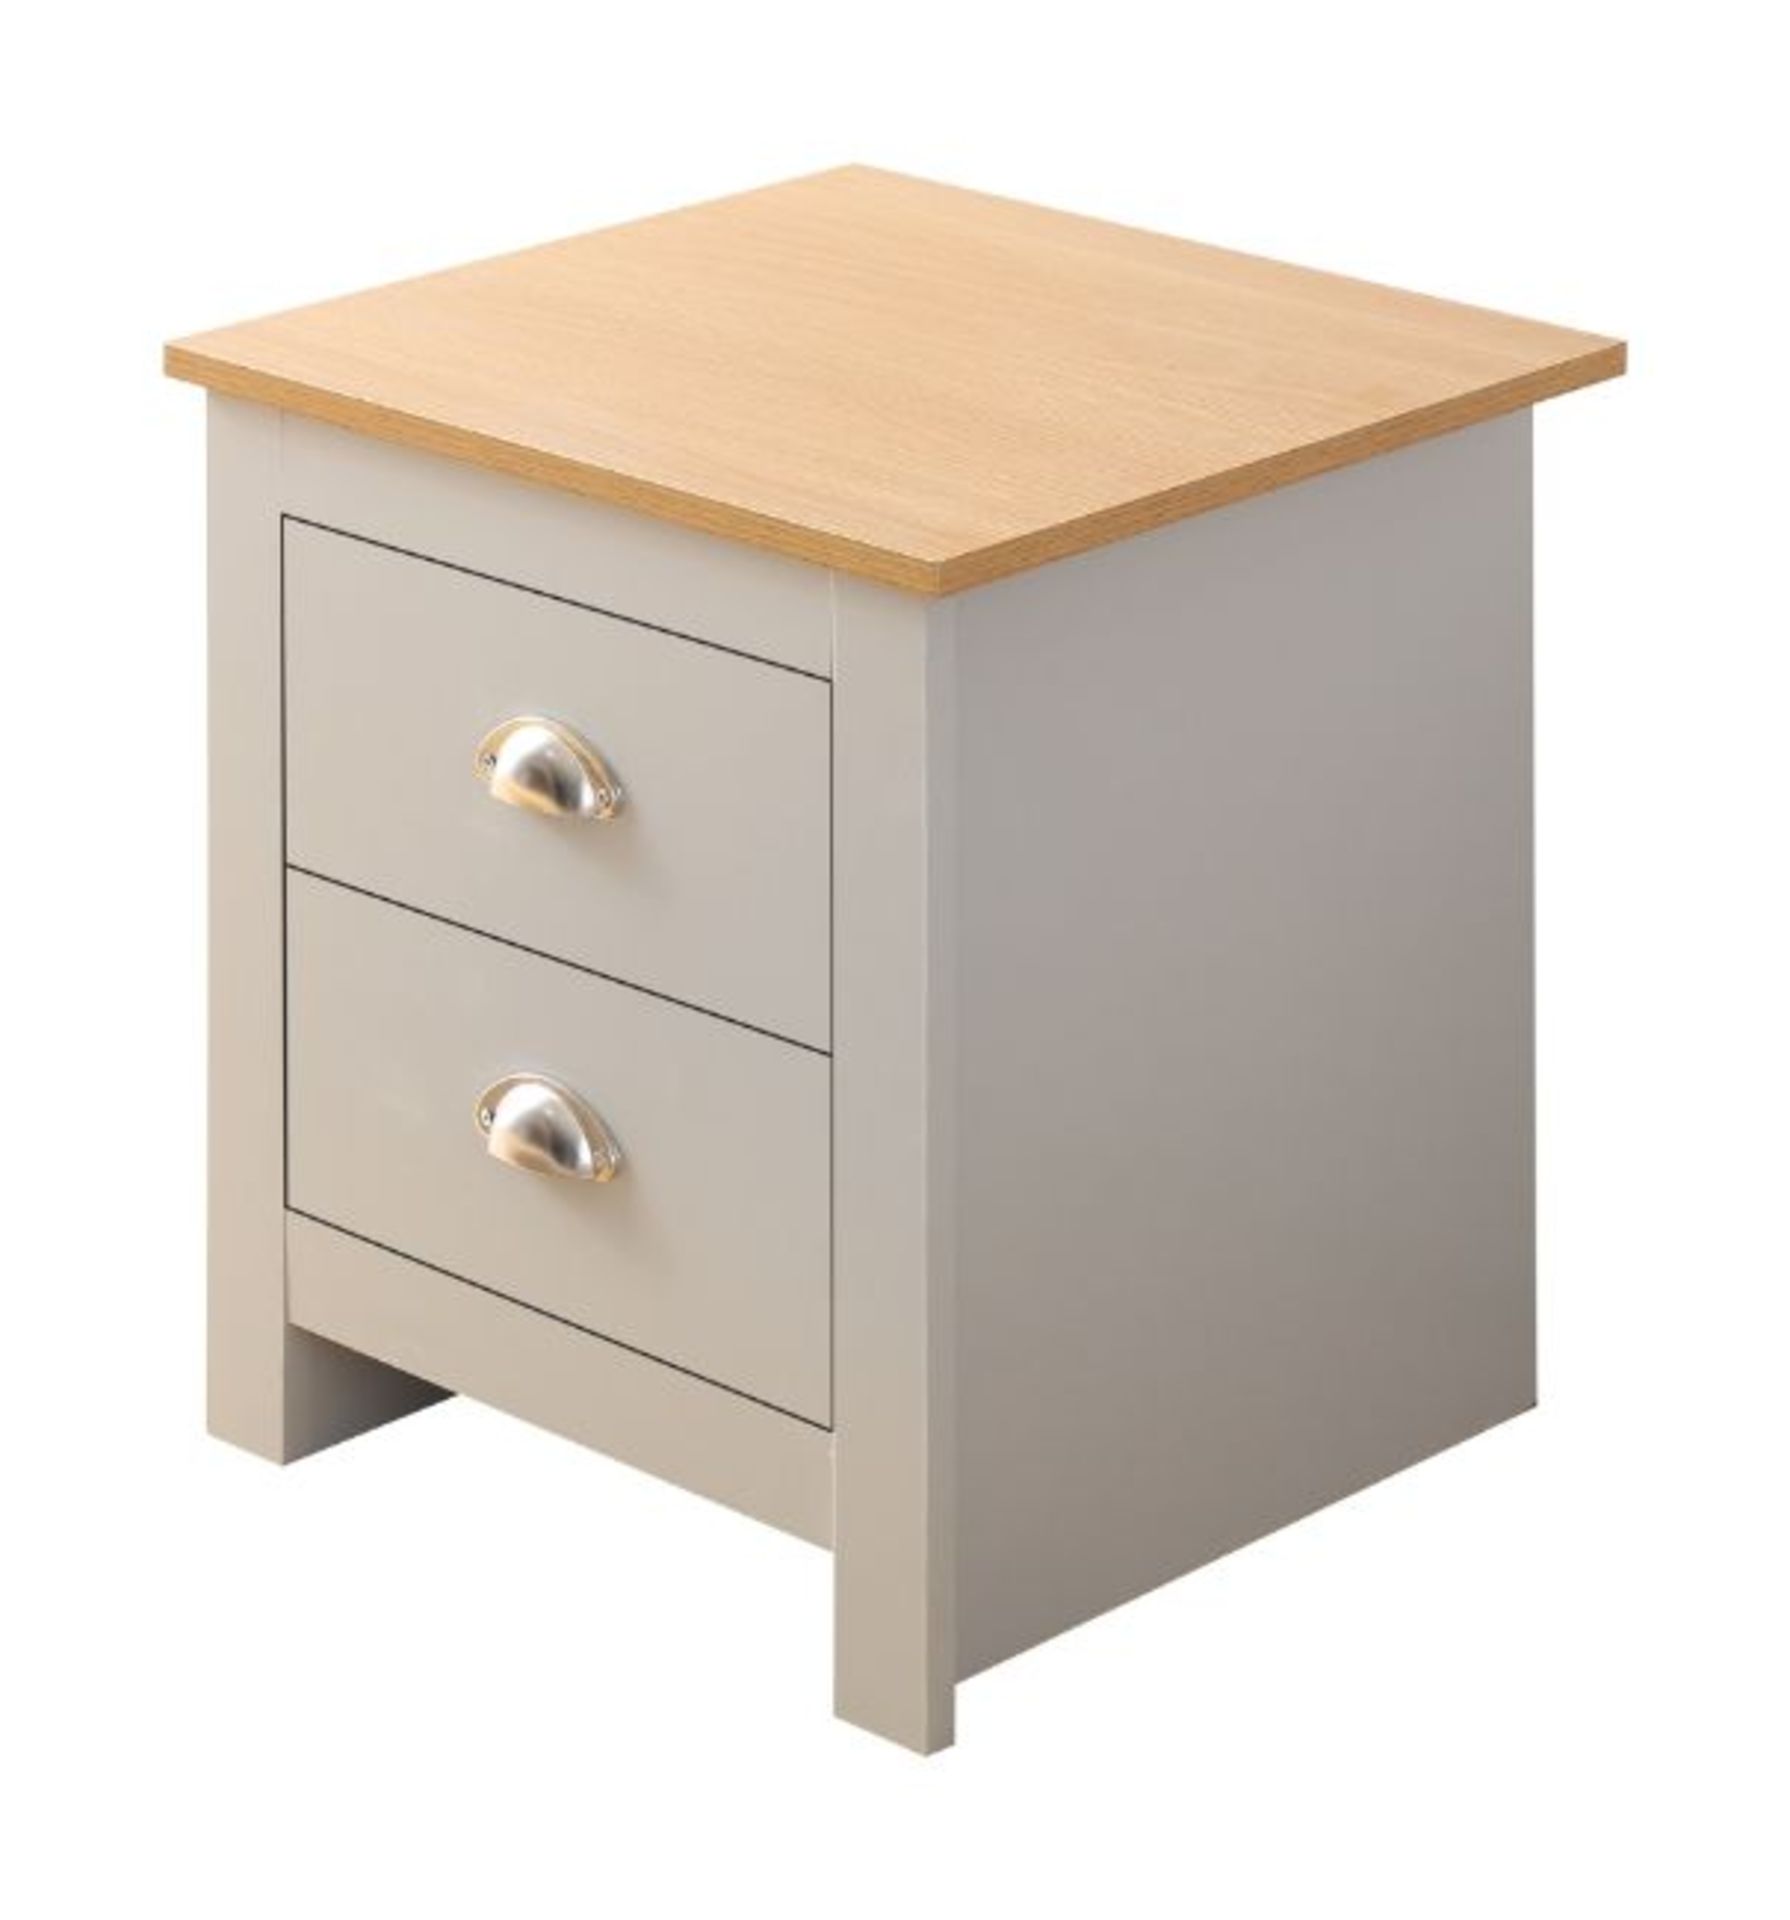 10 X BRAND NEW FLAT PACKED GREY WITH OAK TOP SHAKER-INSPIRED STYLISH DESIGN BEDSIDES - Image 3 of 4